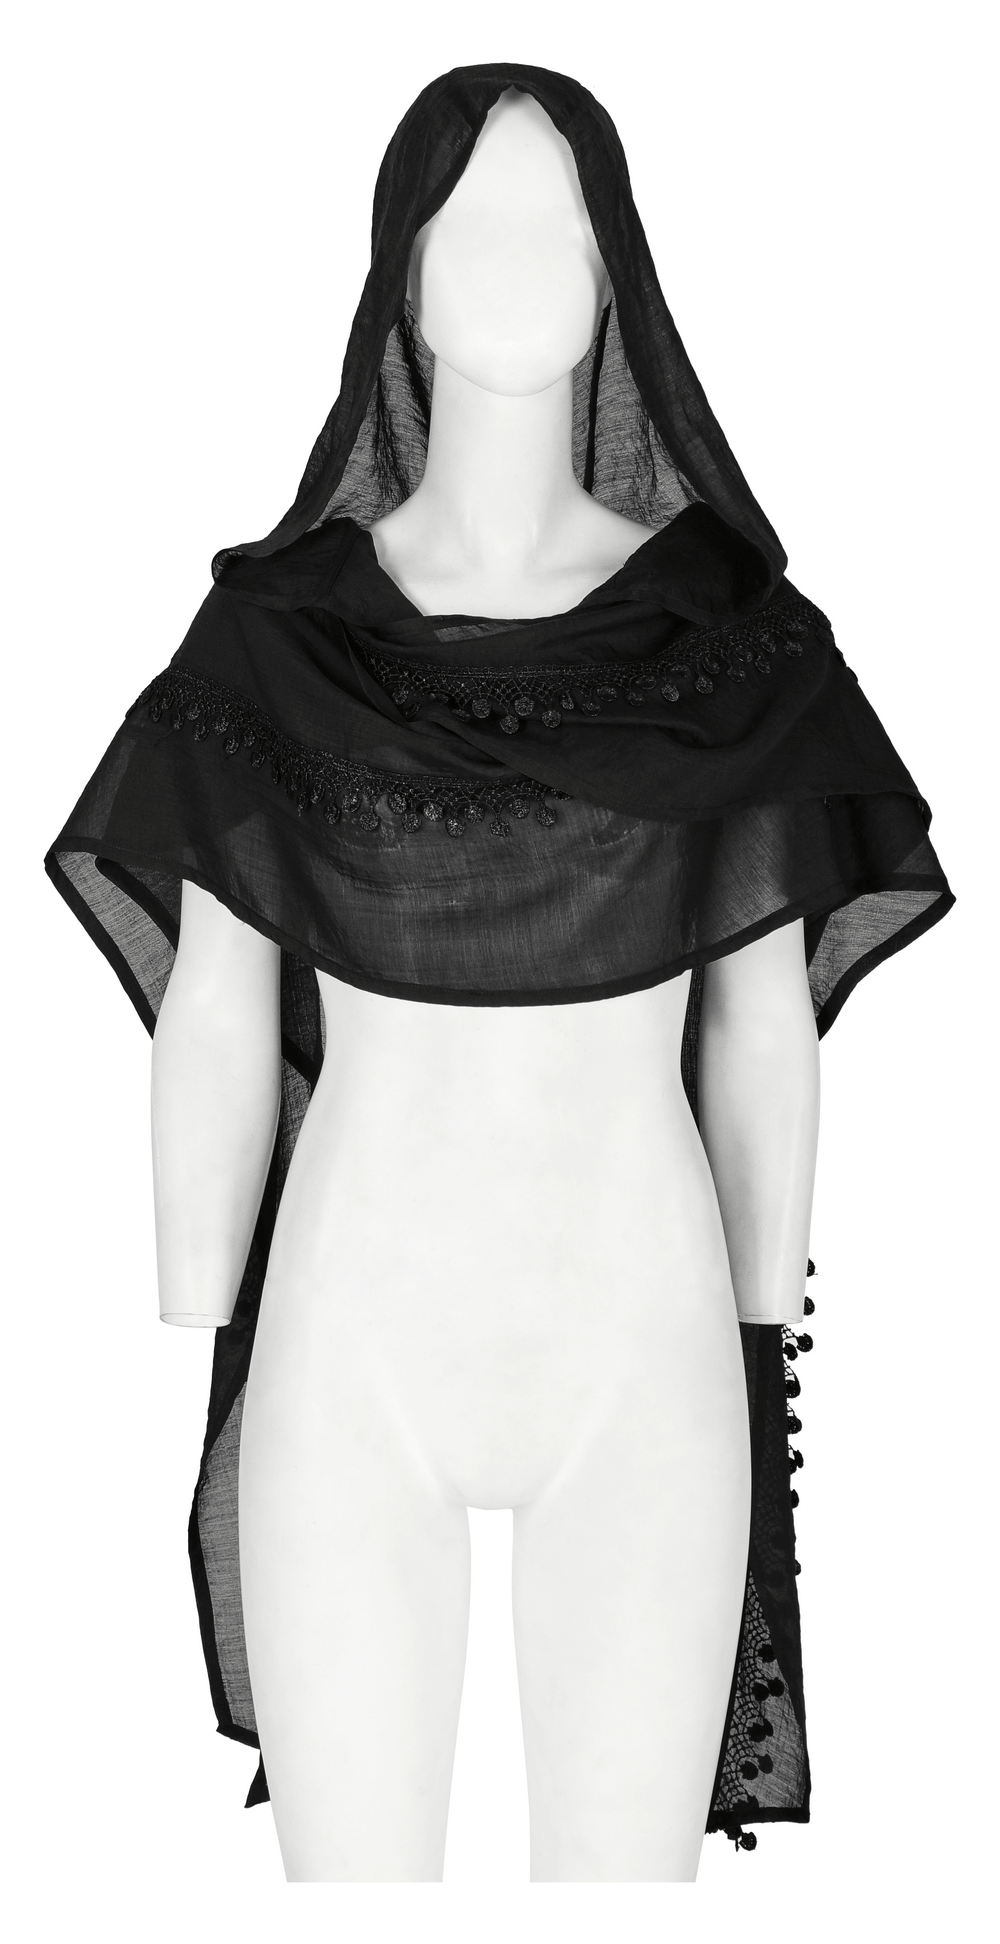 Elegant Black Hooded Lace Scarf Cape for Women